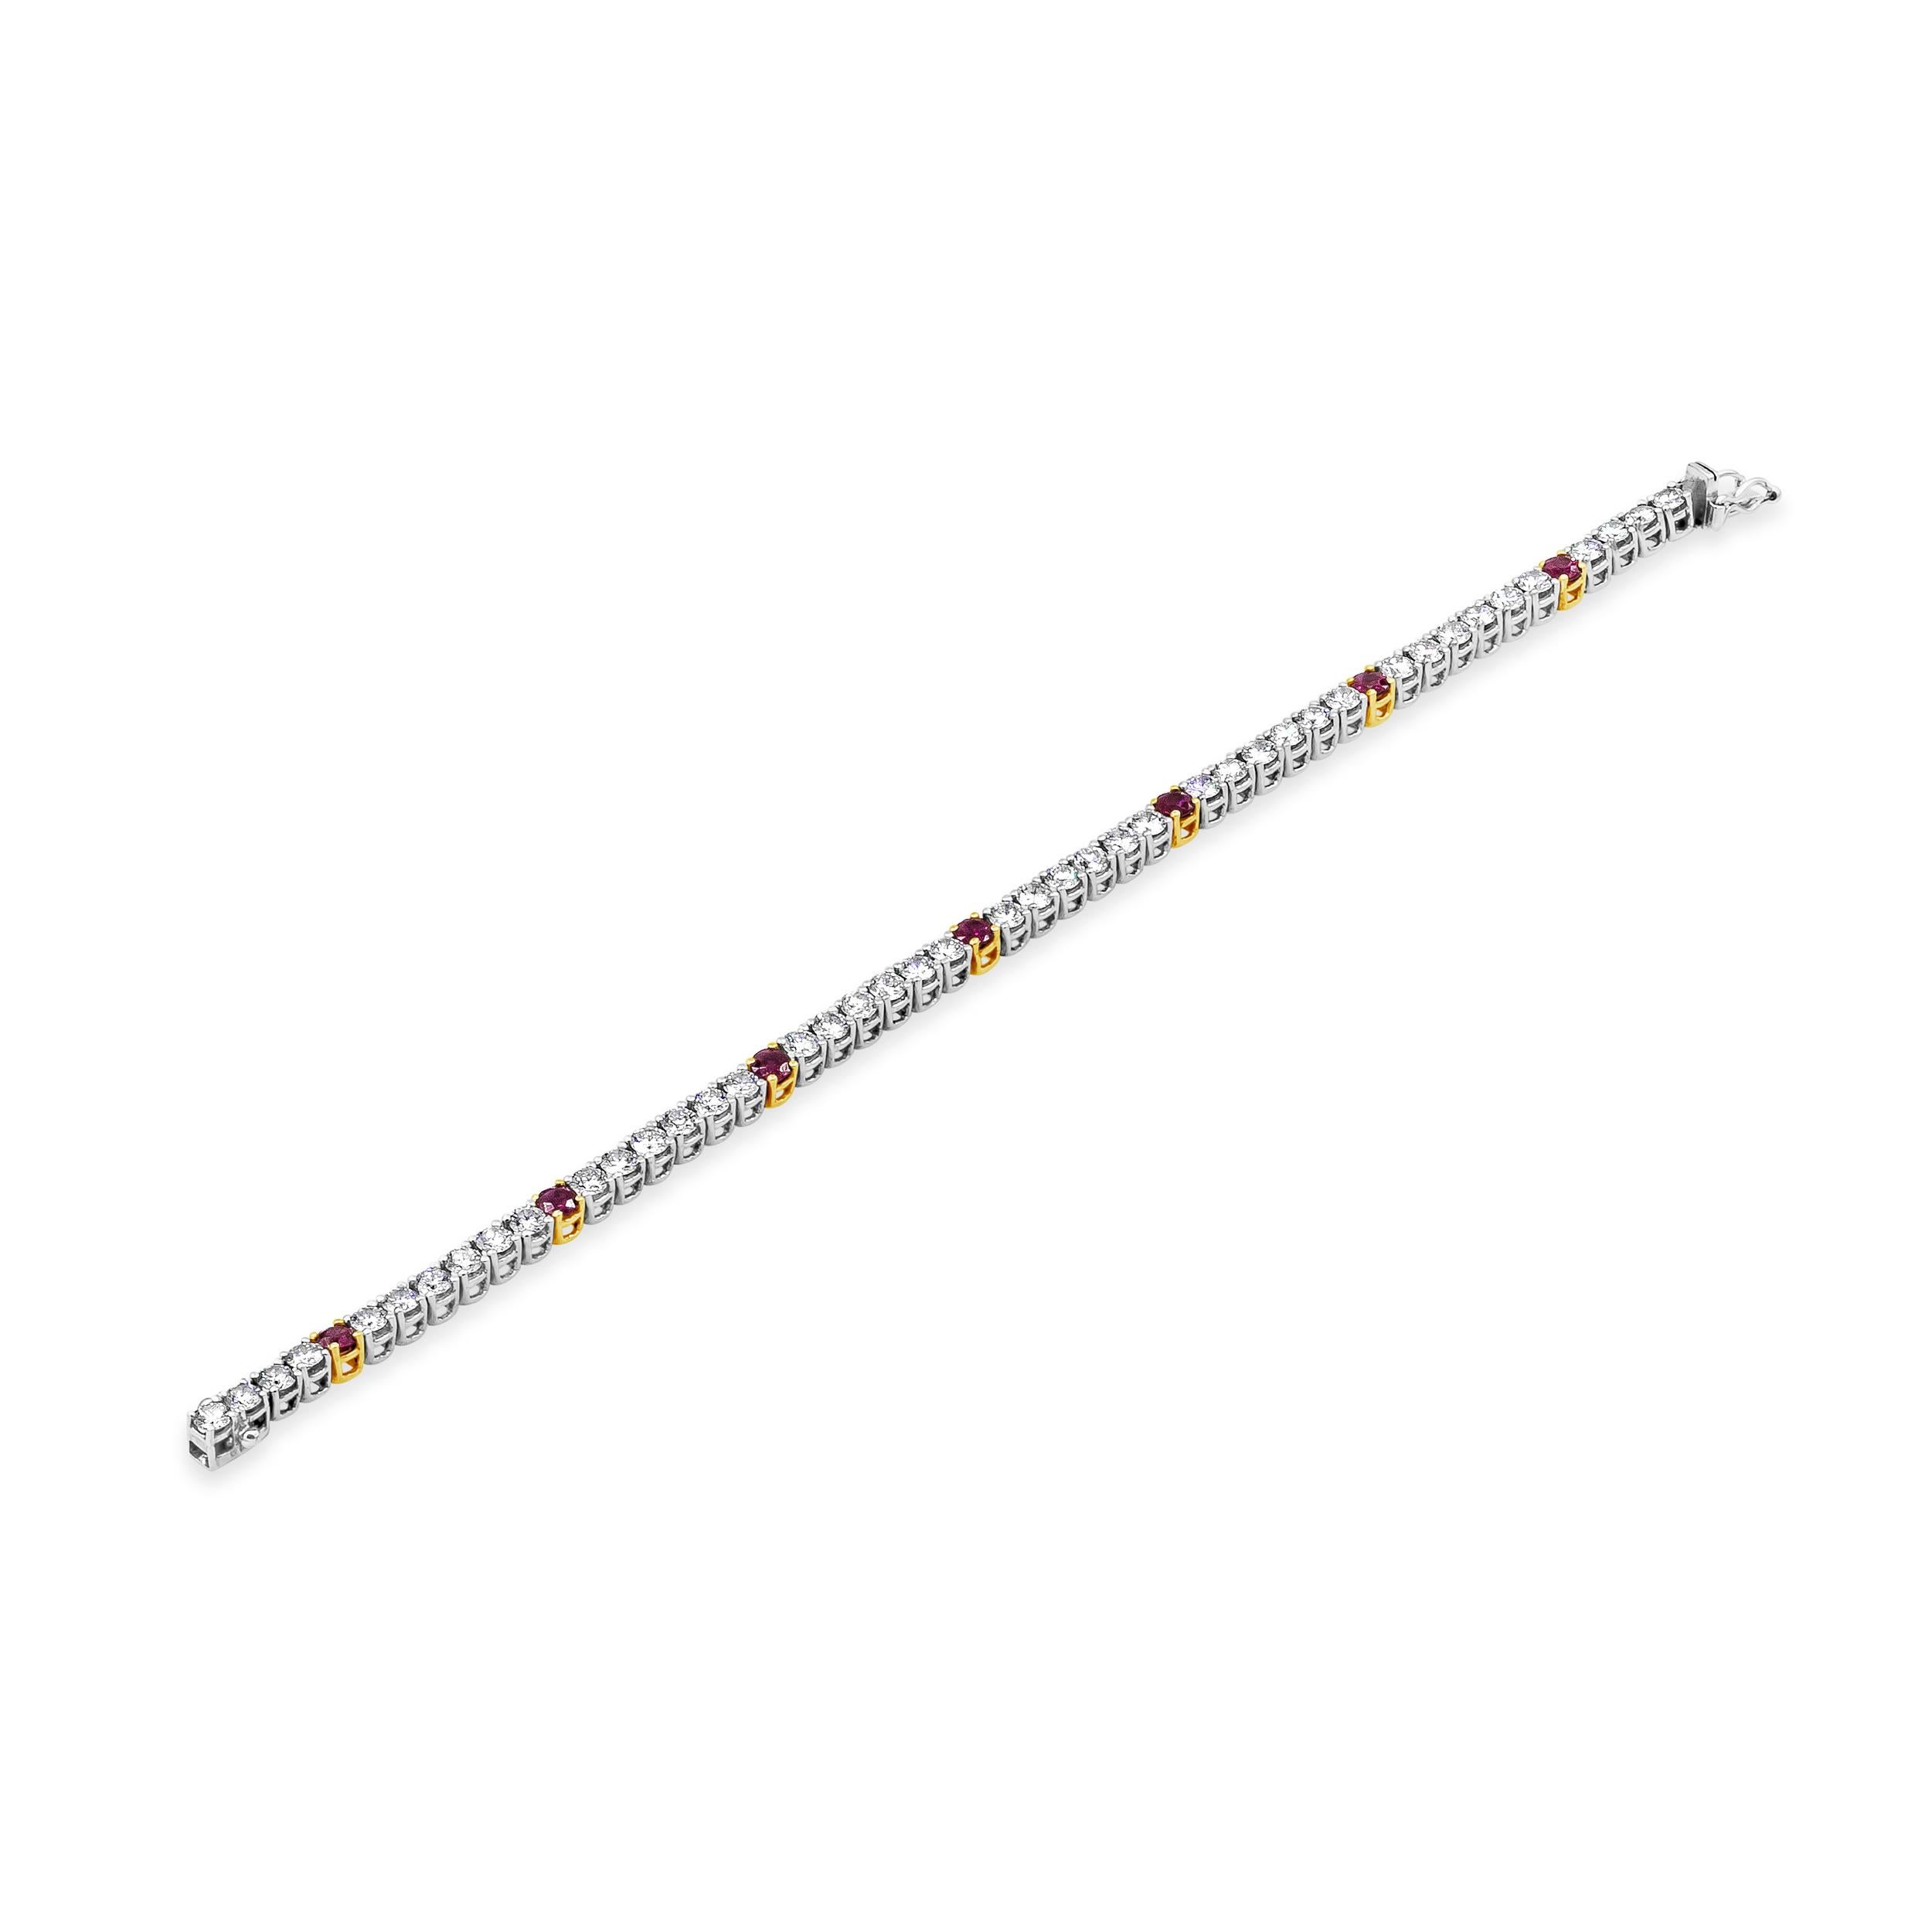 Features a row of round brilliant diamonds, elegantly spaced with round rubies every sixth diamond. Diamonds weigh 4.90 carats total; rubies weigh 1.40 carats total. Made in 18 karat white gold.

Style available in different price ranges. Prices are